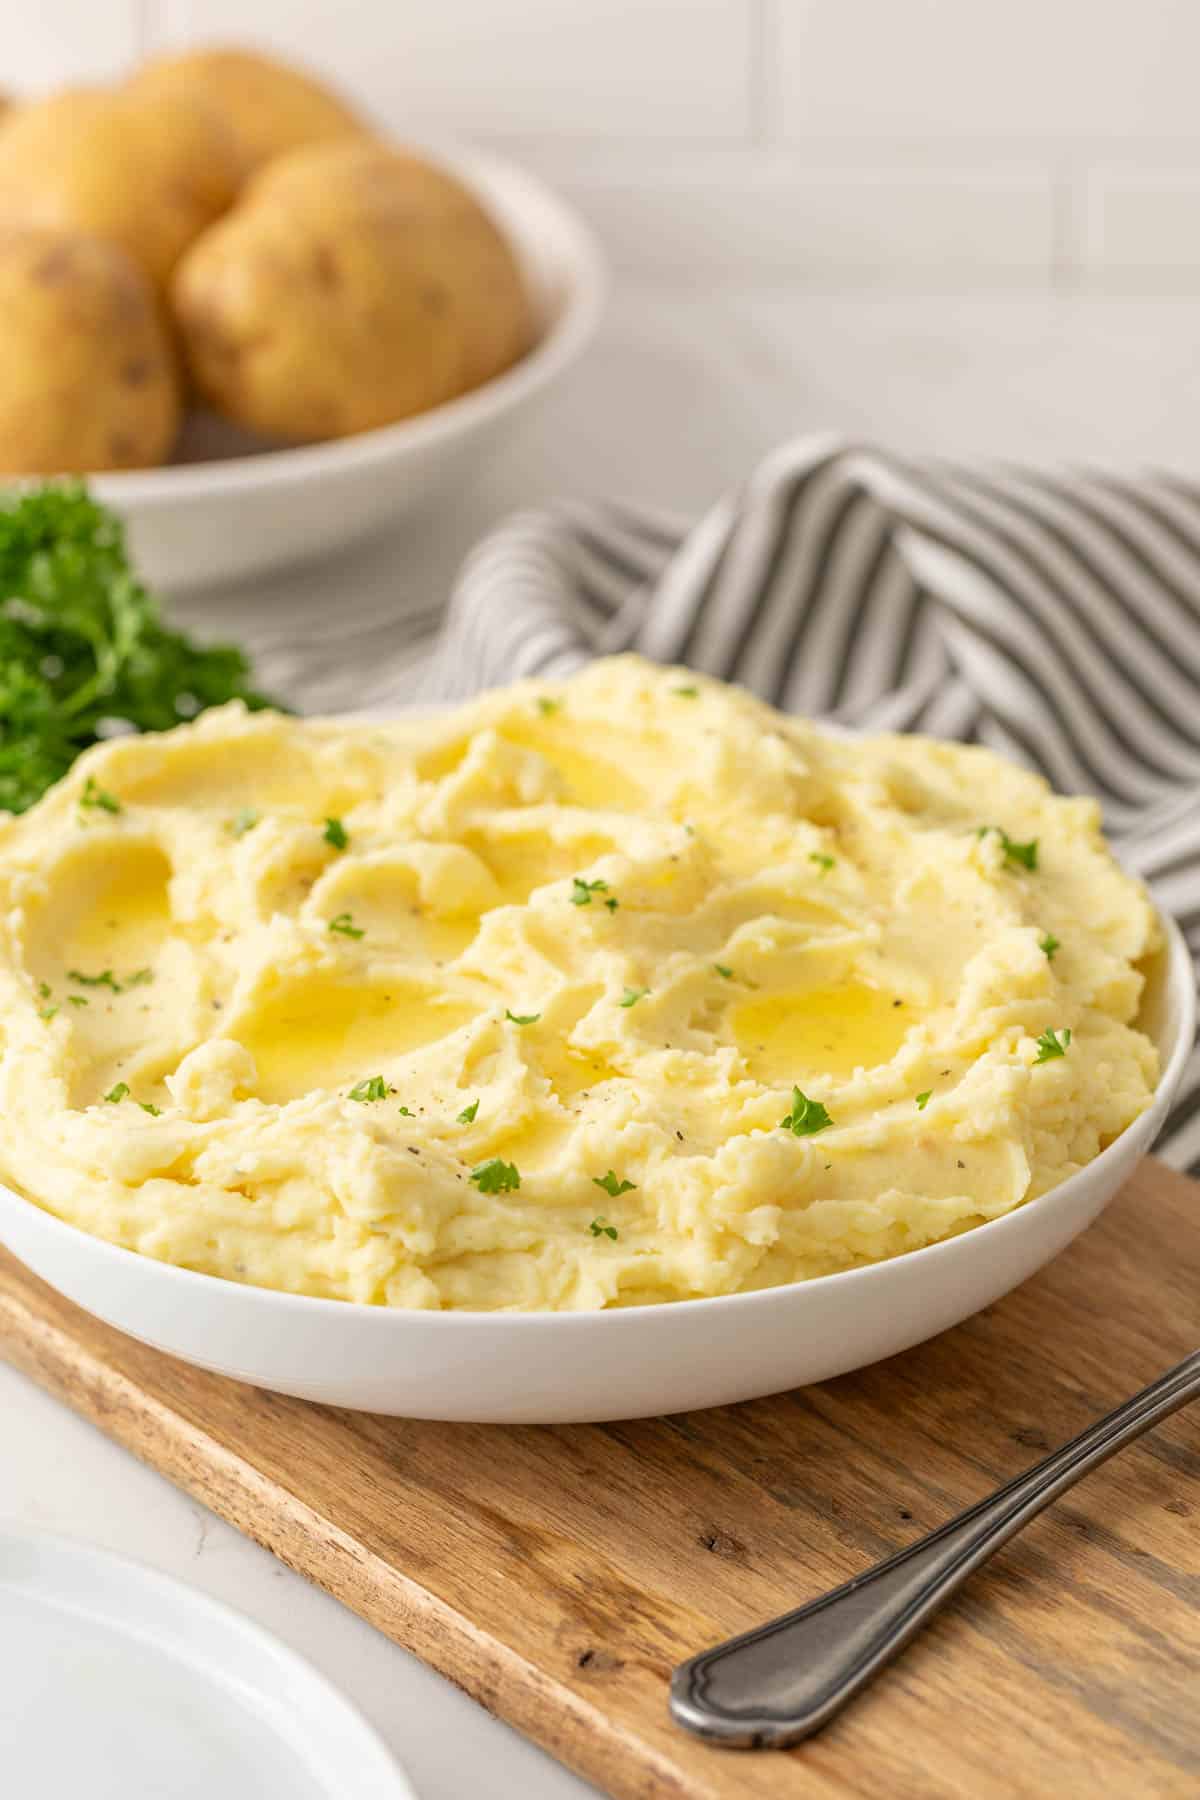 Front view of a bowl of mashed potatoes garnished with chopped parsley.